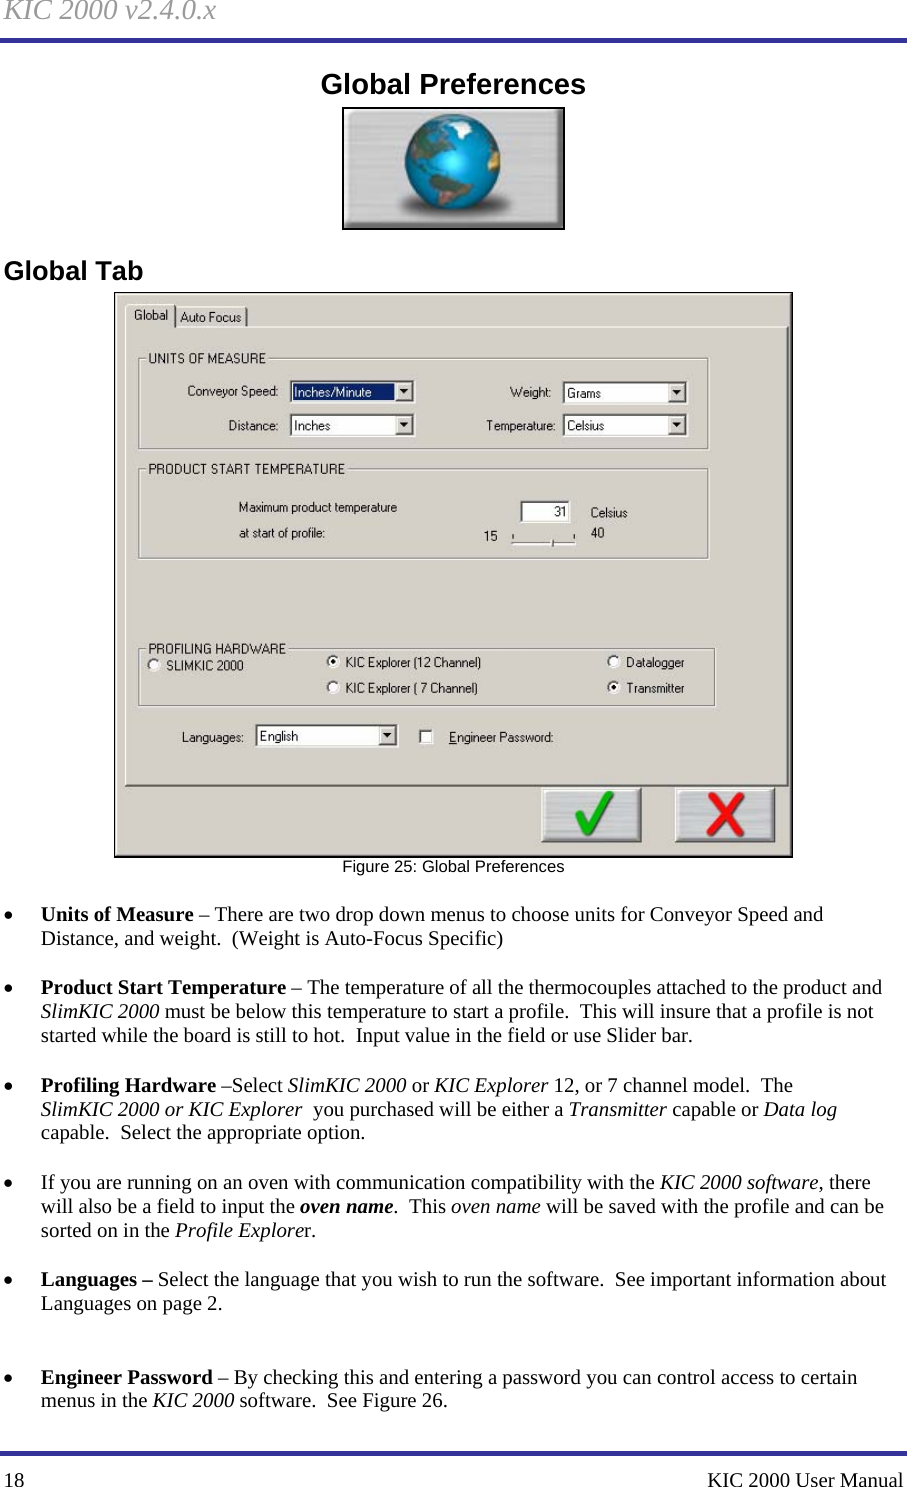 KIC 2000 v2.4.0.x 18    KIC 2000 User Manual Global Preferences  Global Tab  Figure 25: Global Preferences  • Units of Measure – There are two drop down menus to choose units for Conveyor Speed and Distance, and weight.  (Weight is Auto-Focus Specific)  • Product Start Temperature – The temperature of all the thermocouples attached to the product and SlimKIC 2000 must be below this temperature to start a profile.  This will insure that a profile is not started while the board is still to hot.  Input value in the field or use Slider bar.  • Profiling Hardware –Select SlimKIC 2000 or KIC Explorer 12, or 7 channel model.  The SlimKIC 2000 or KIC Explorer  you purchased will be either a Transmitter capable or Data log capable.  Select the appropriate option.  • If you are running on an oven with communication compatibility with the KIC 2000 software, there will also be a field to input the oven name.  This oven name will be saved with the profile and can be sorted on in the Profile Explorer.  • Languages – Select the language that you wish to run the software.  See important information about Languages on page 2.   • Engineer Password – By checking this and entering a password you can control access to certain menus in the KIC 2000 software.  See Figure 26.   